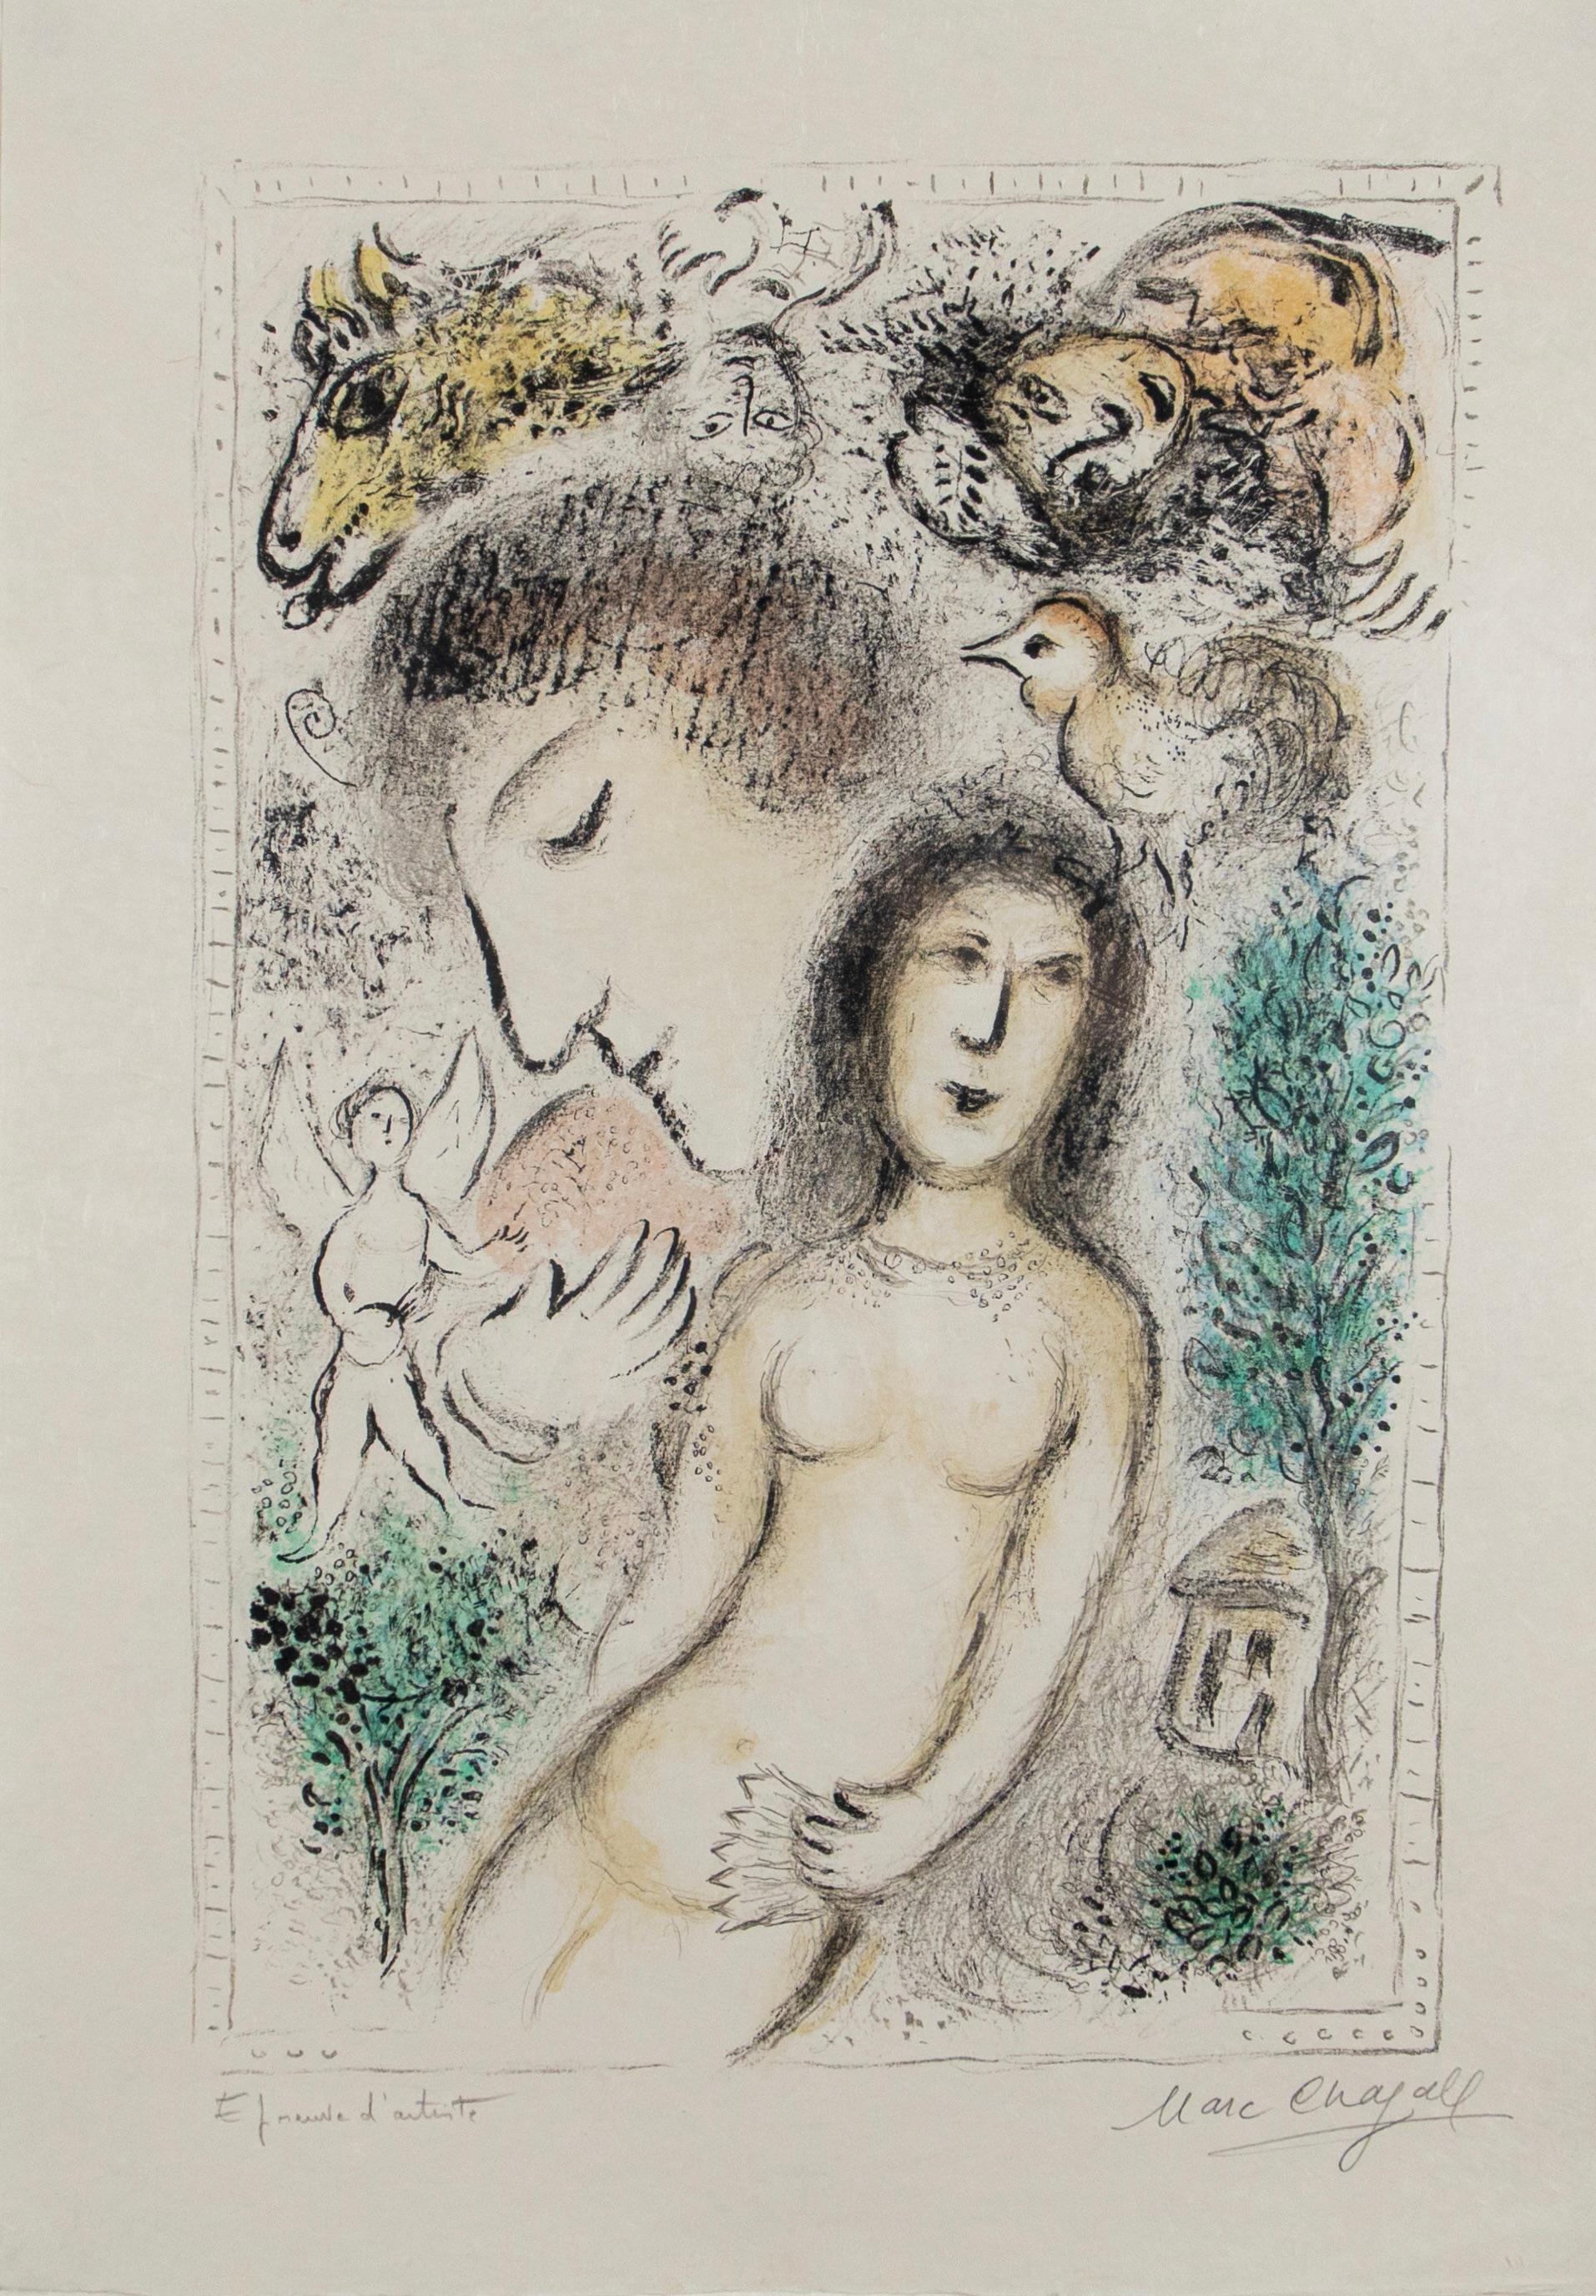 Marc Chagall Nude Print – Le Nu The Nude - Farblithographie 1978 - gerahmt - signiert - Engel, Vogel